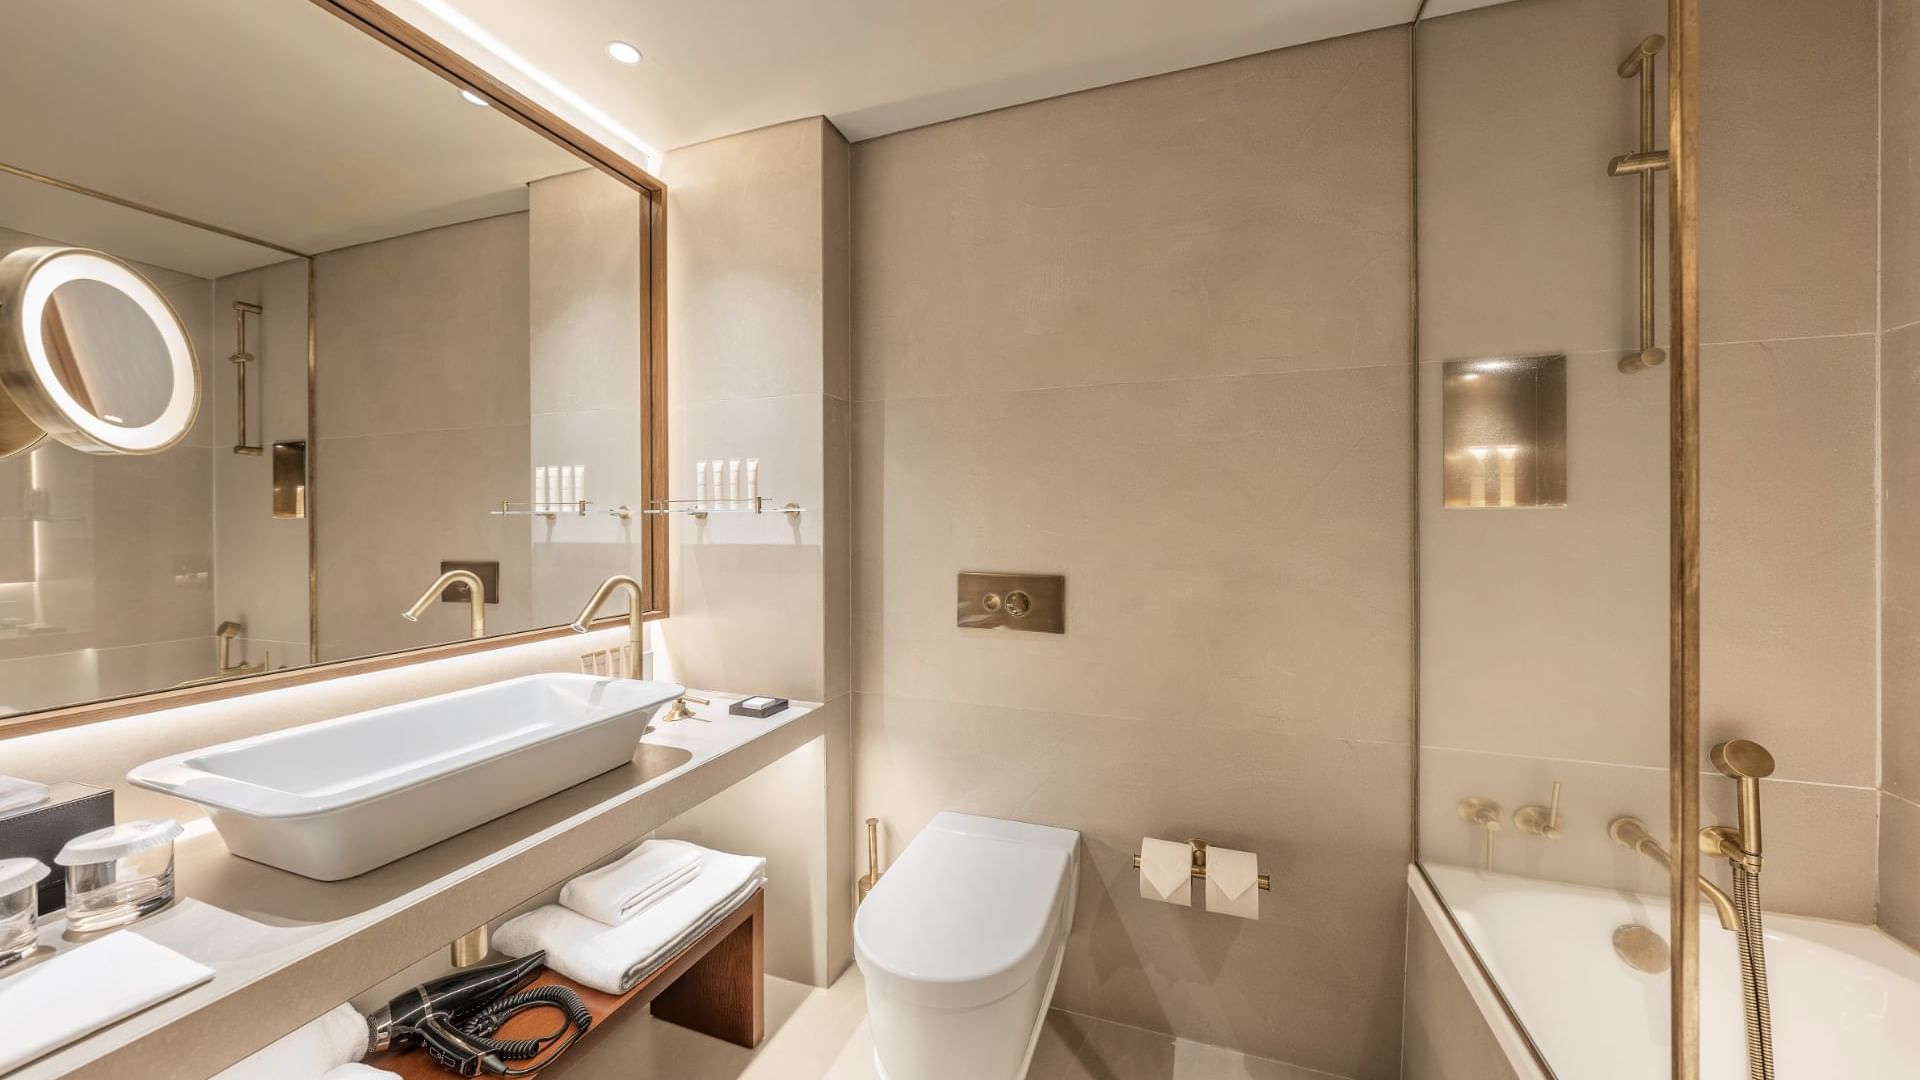 Bathroom interior with a tub & other fittings, Bensaude Hotels